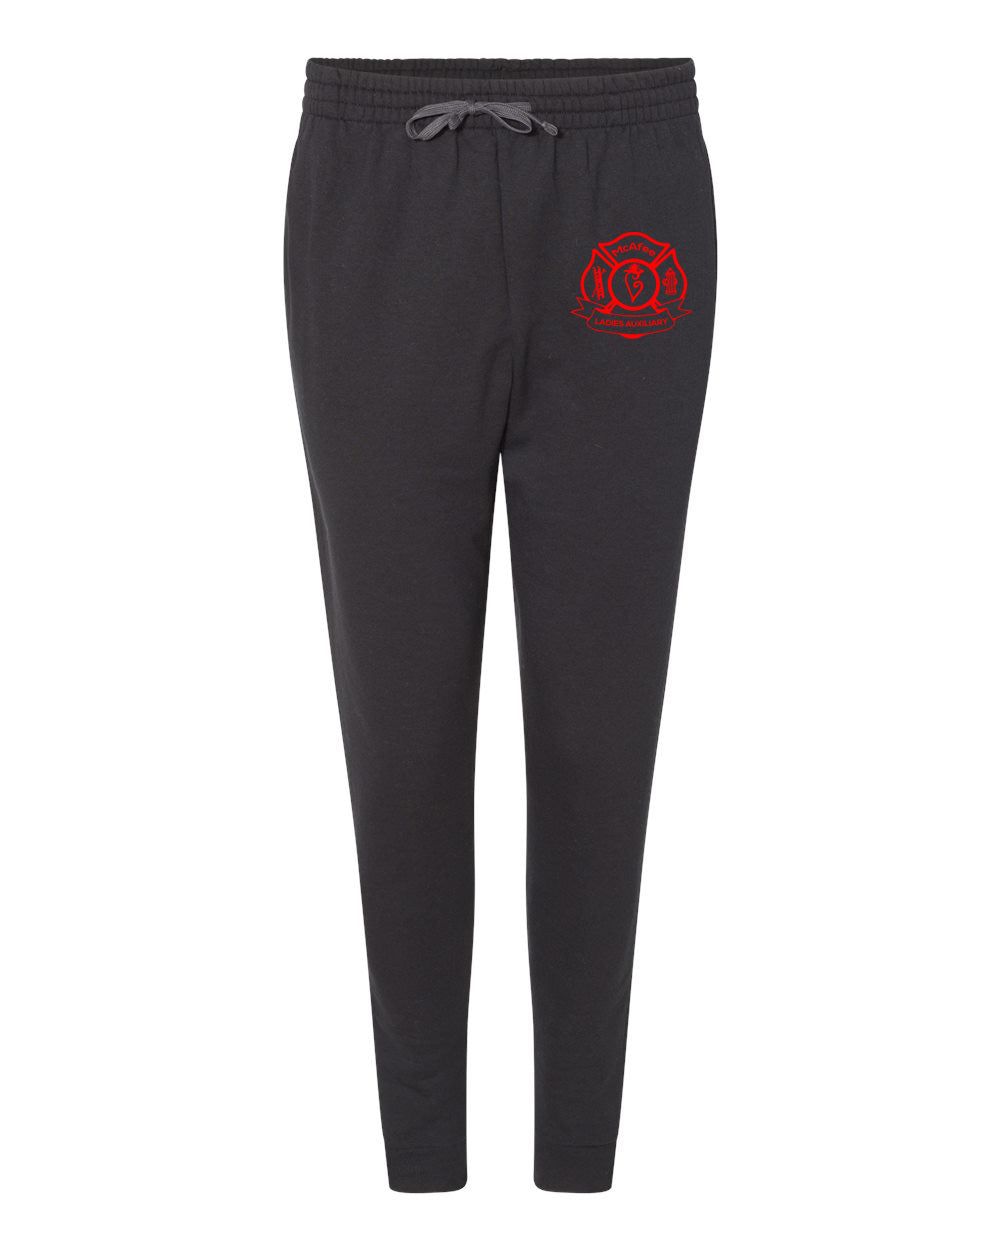 McAfee Fire Ladies Auxiliary Sweatpants